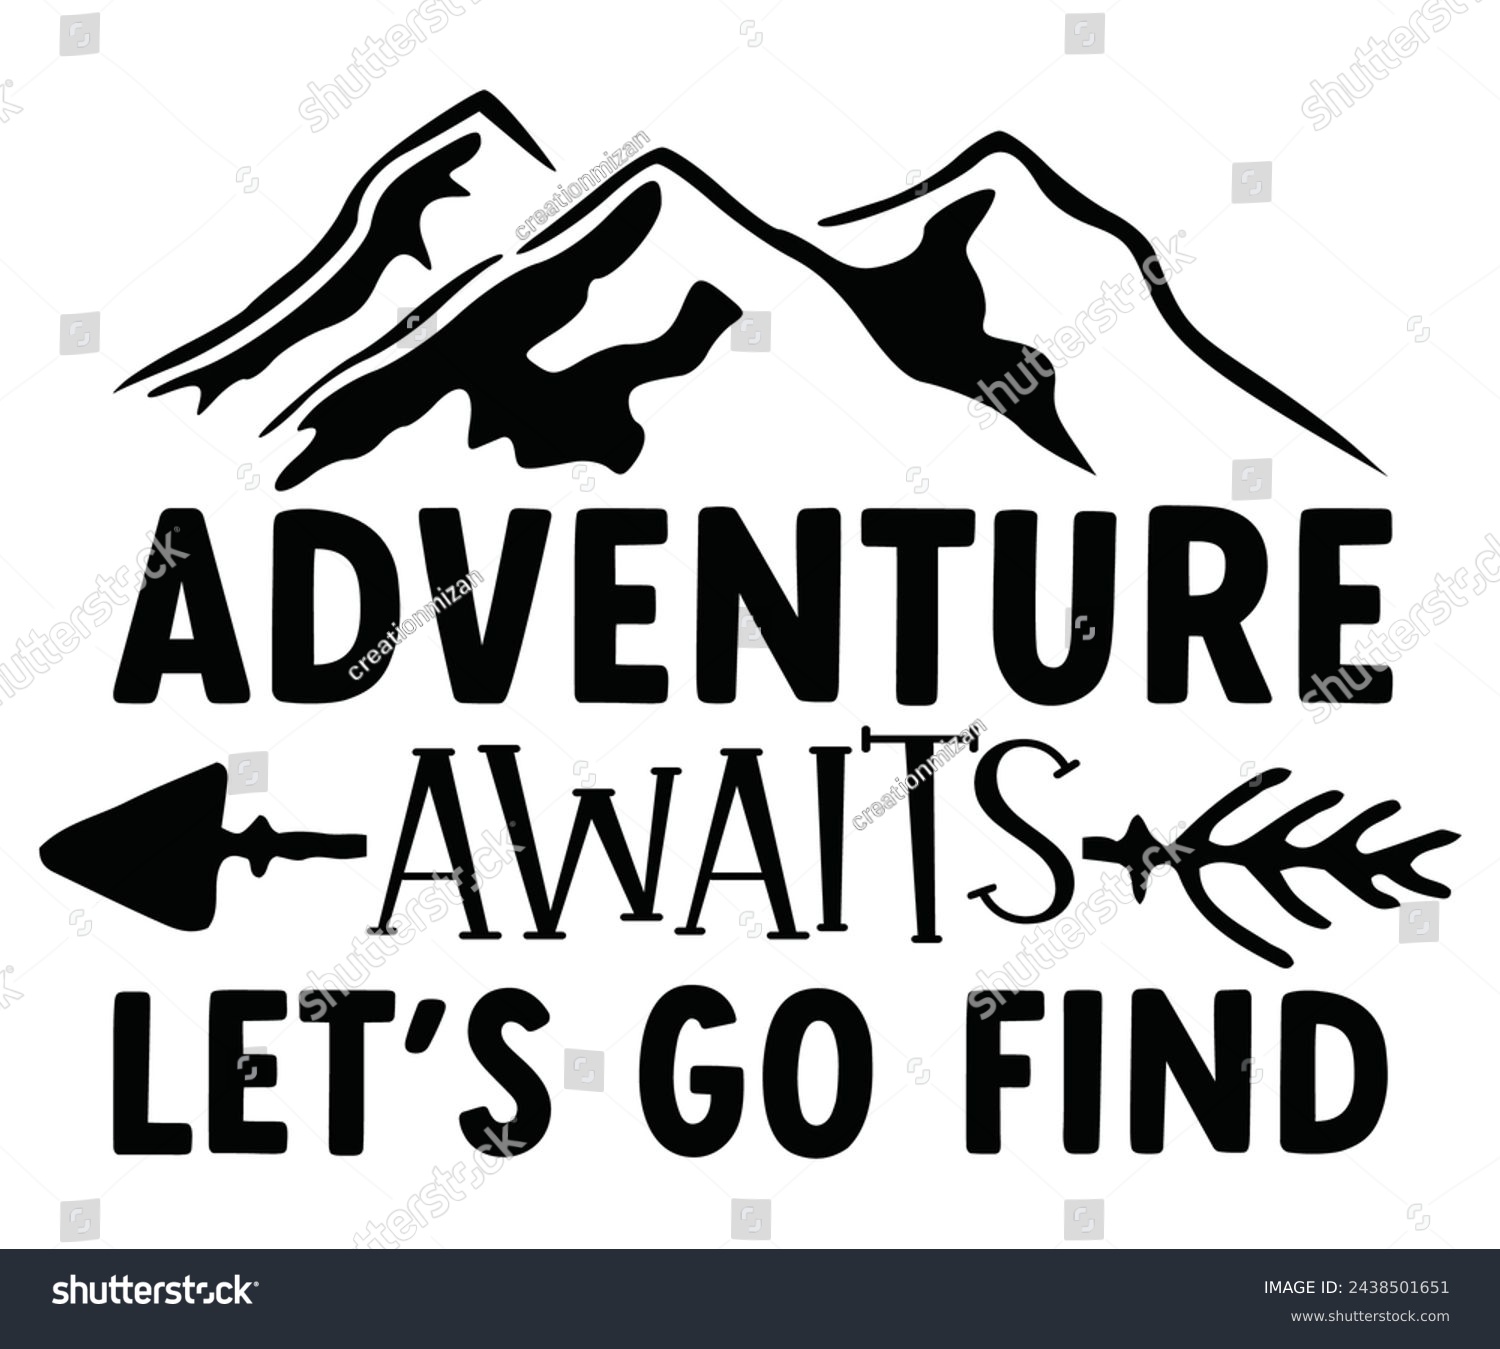 SVG of Adventure Awaits Let's Go Find Svg,Camping Svg,Hiking,Funny Camping,Adventure,Summer Camp,Happy Camper,Camp Life,Camp Saying,Camping Shirt svg